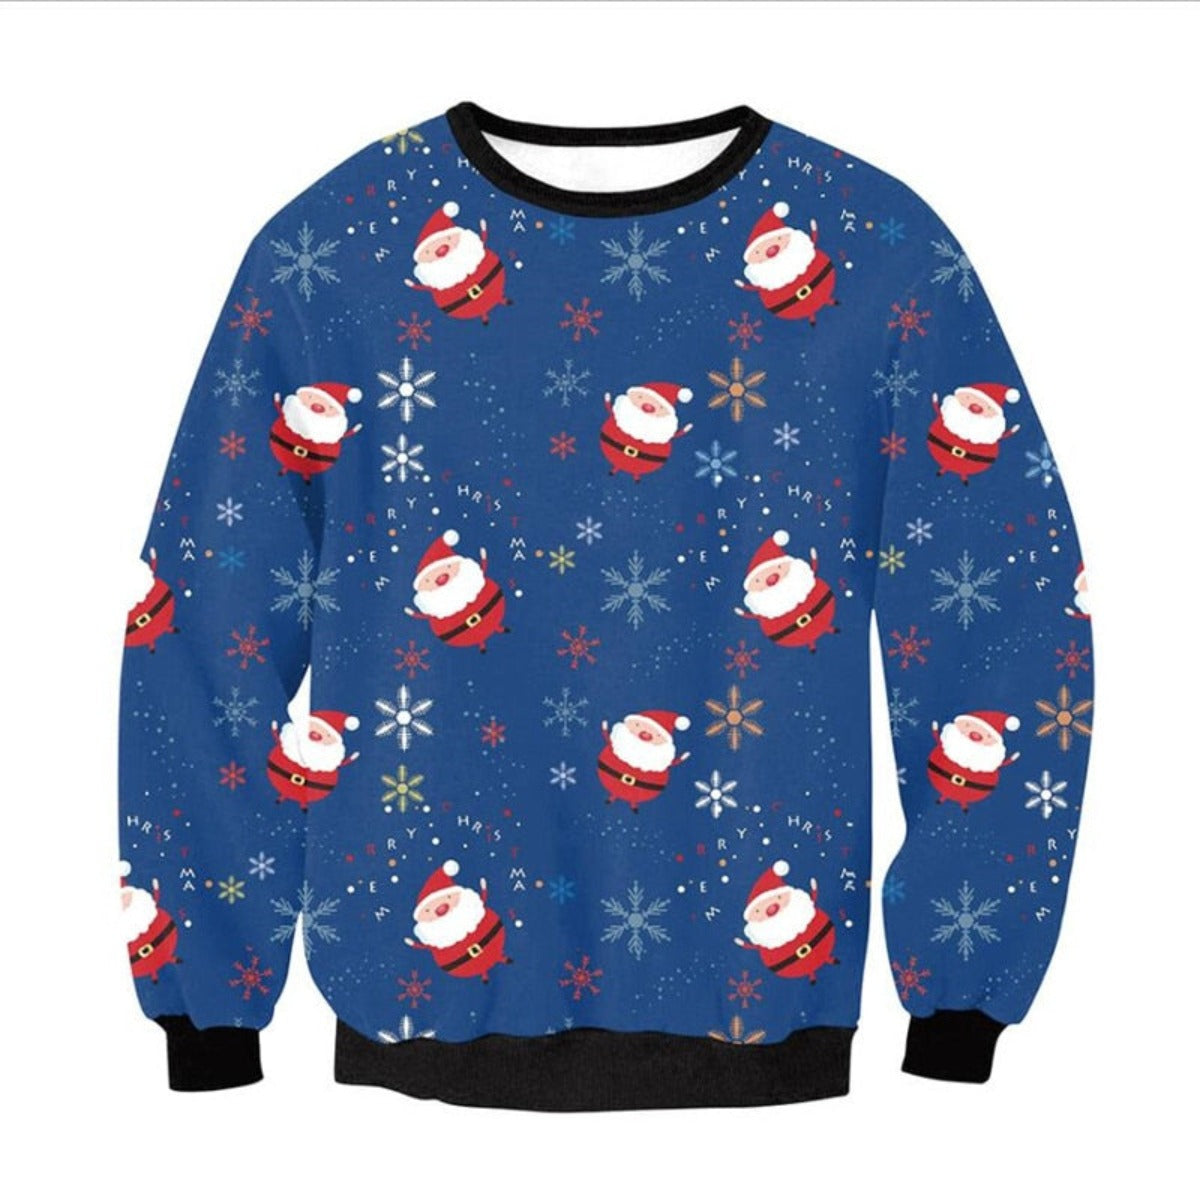 Snowflakes And Santa Claus Ugly Christmas Sweater